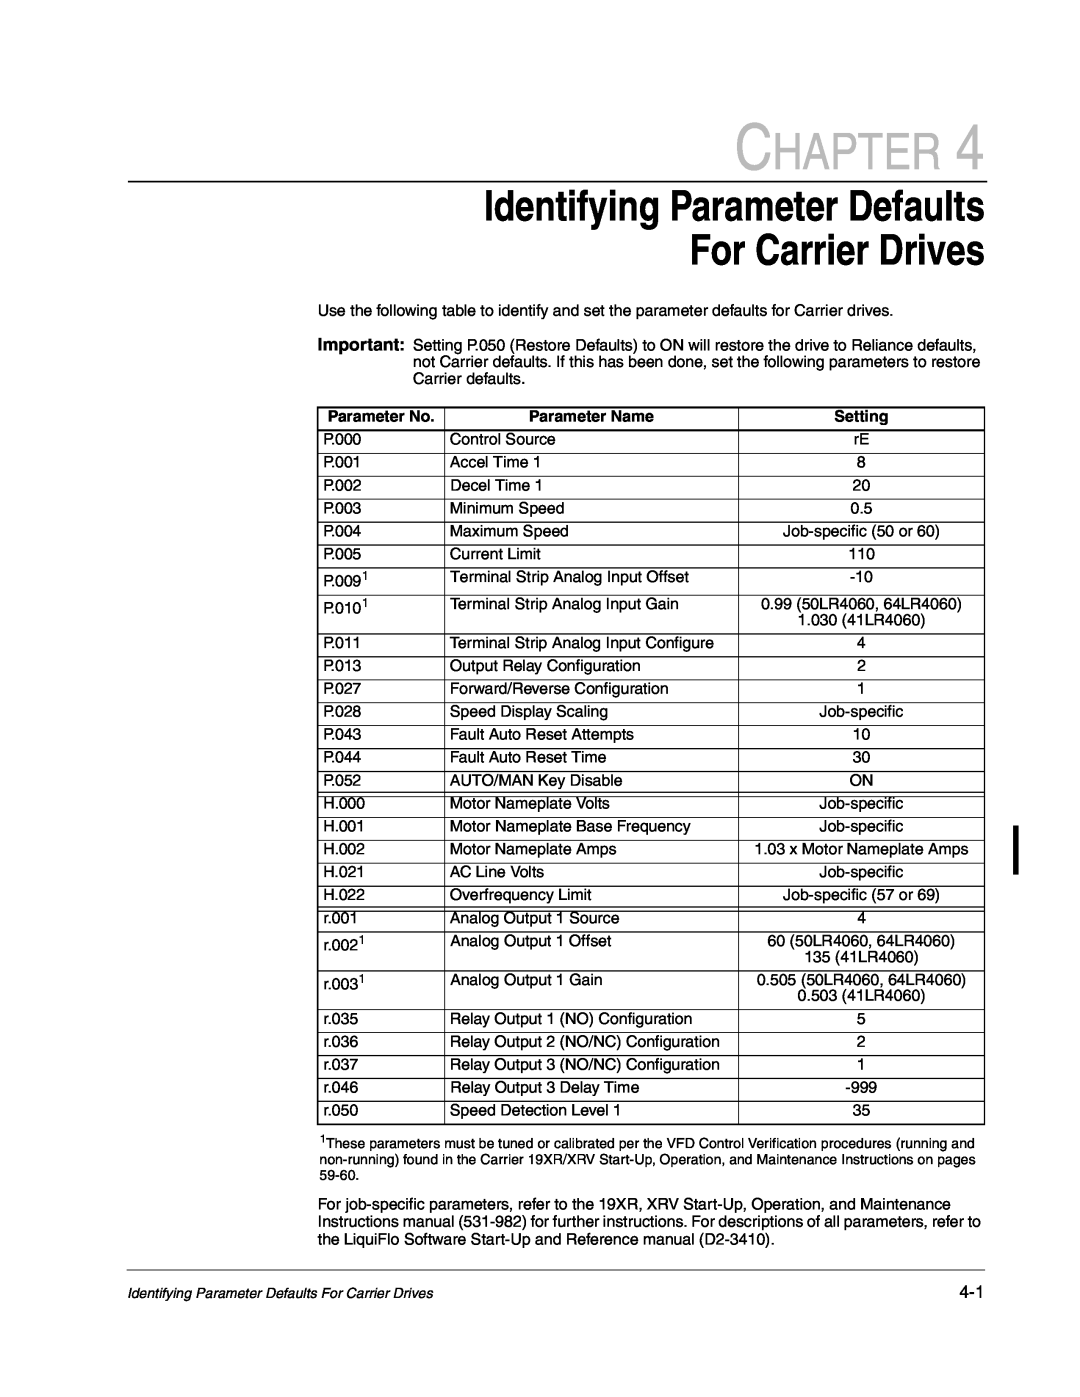 Carrier D2-3466-2 For Carrier Drives, Chapter, Identifying Parameter Defaults, Parameter No, Parameter Name, Setting 